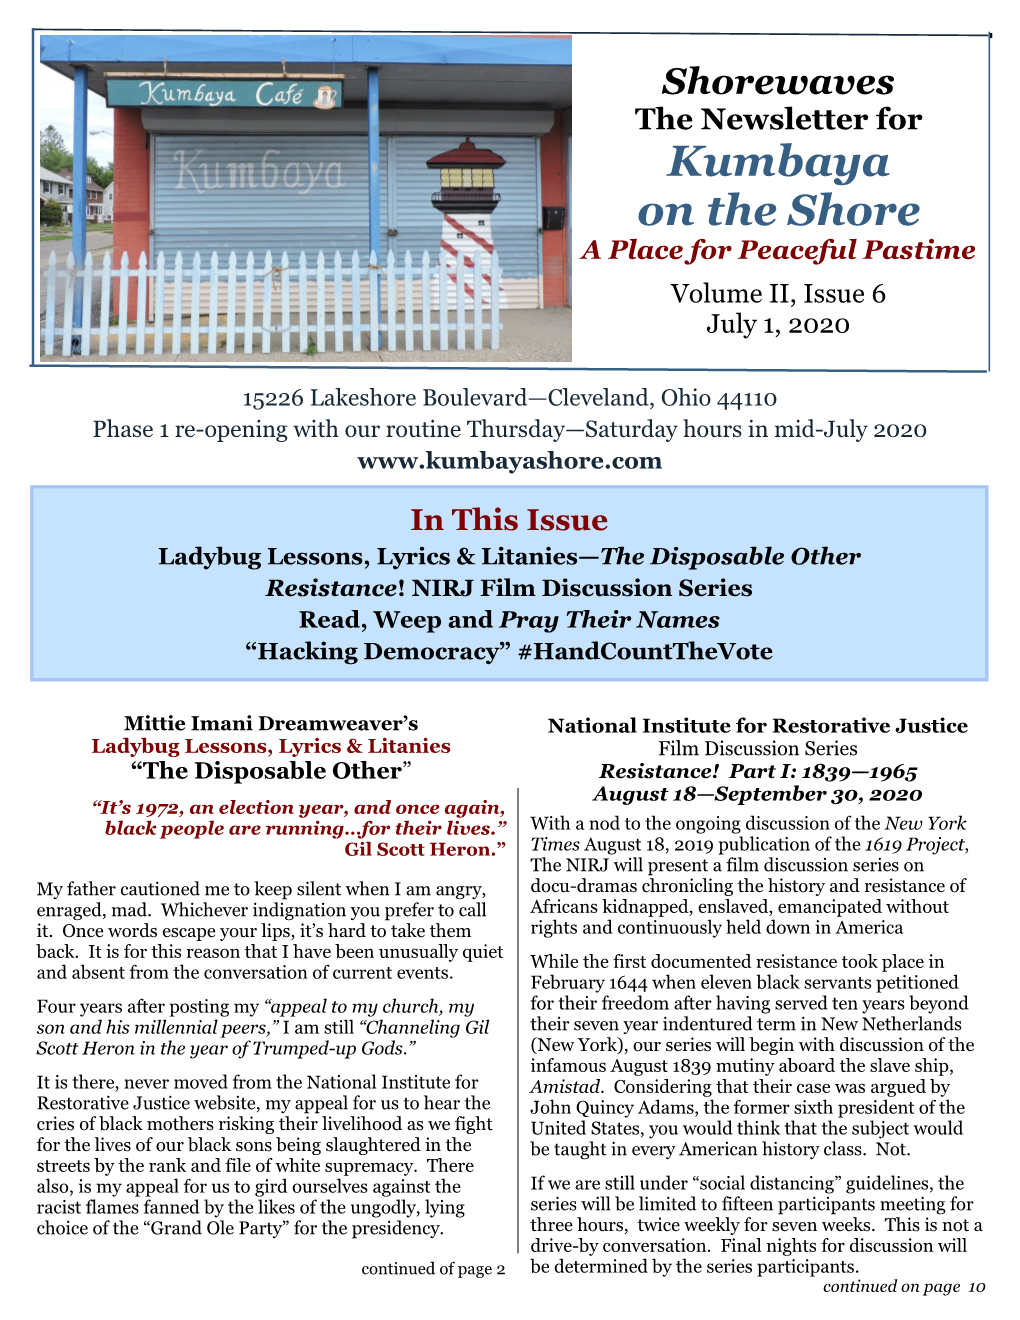 Shorewaves the Newsletter for Kumbaya on the Shore a Place for Peaceful Pastime